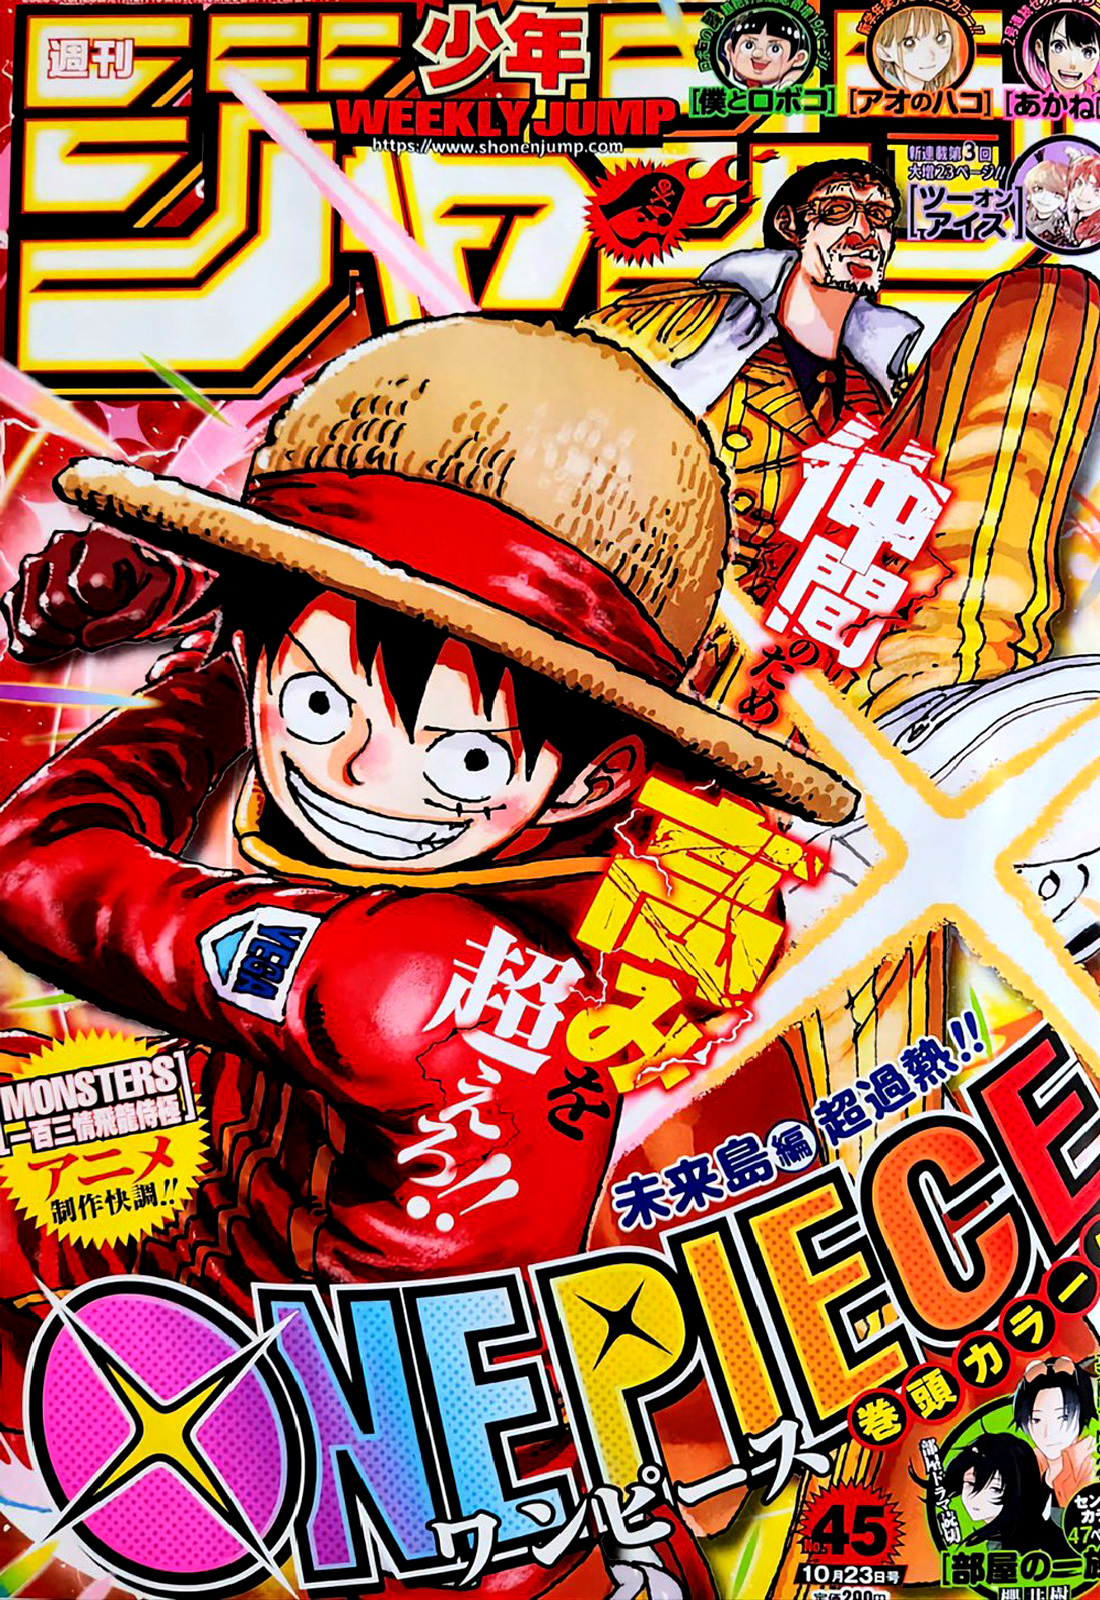 One Piece, Chapter 1094 | TcbScans Org - Free Manga Online in High 